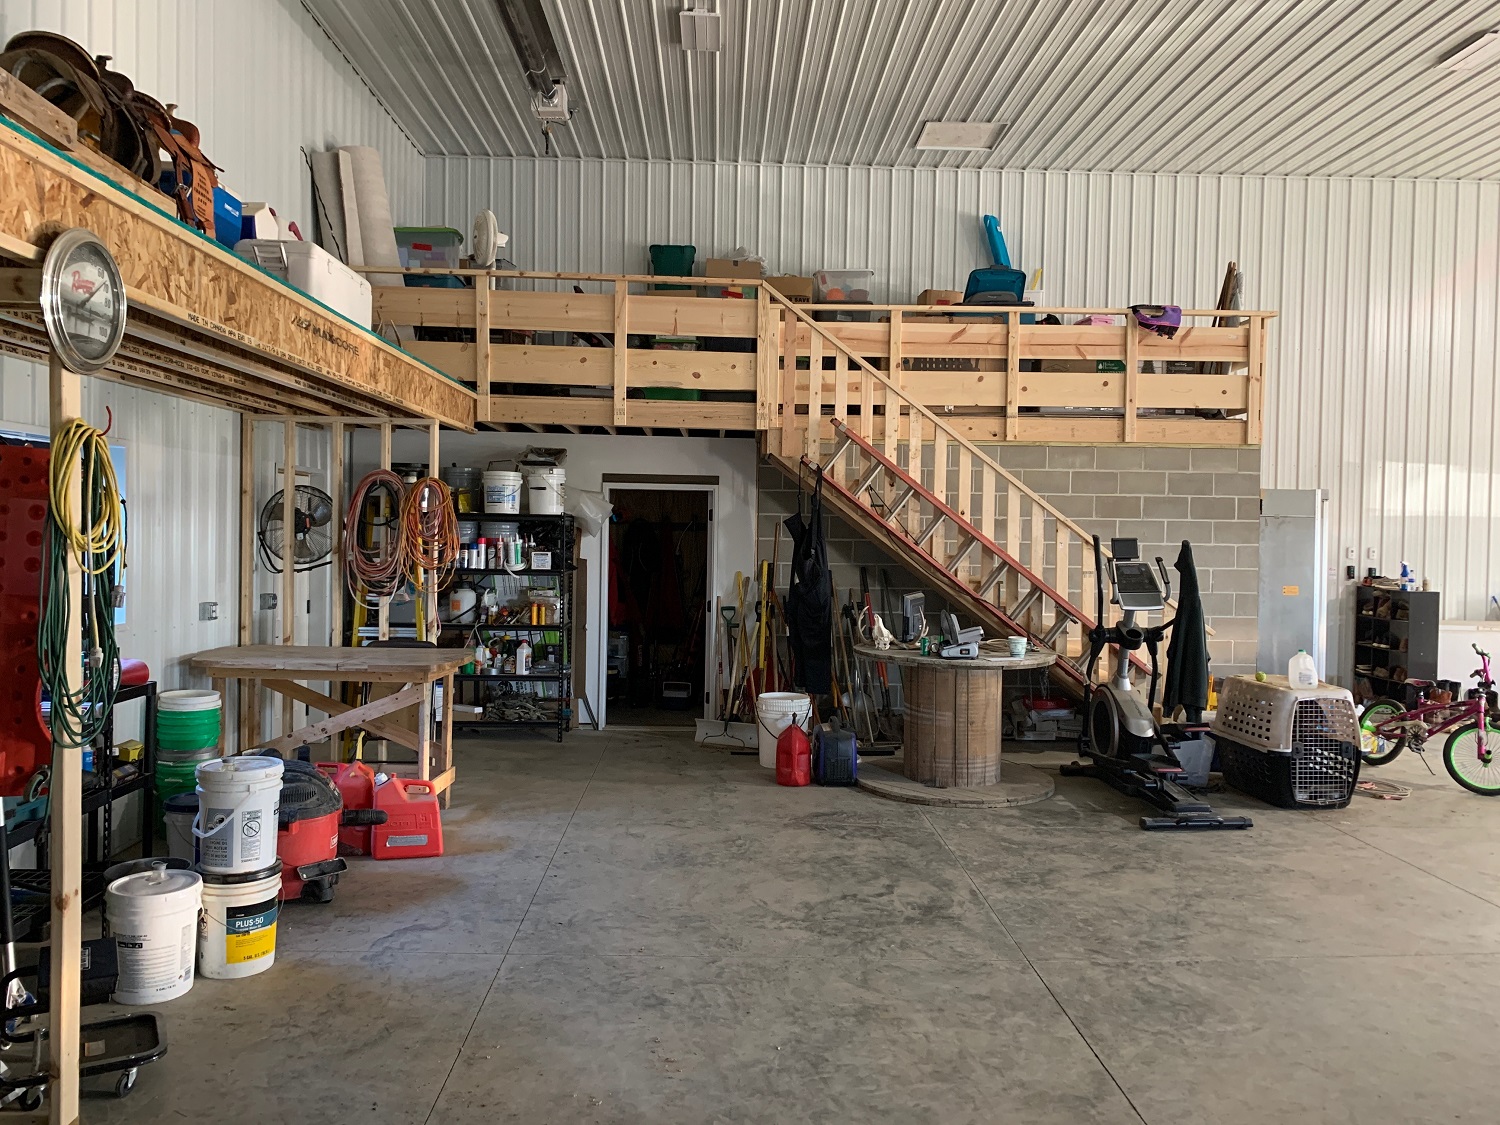 Why We Are Moving To A Barndominium | Barndo Blog